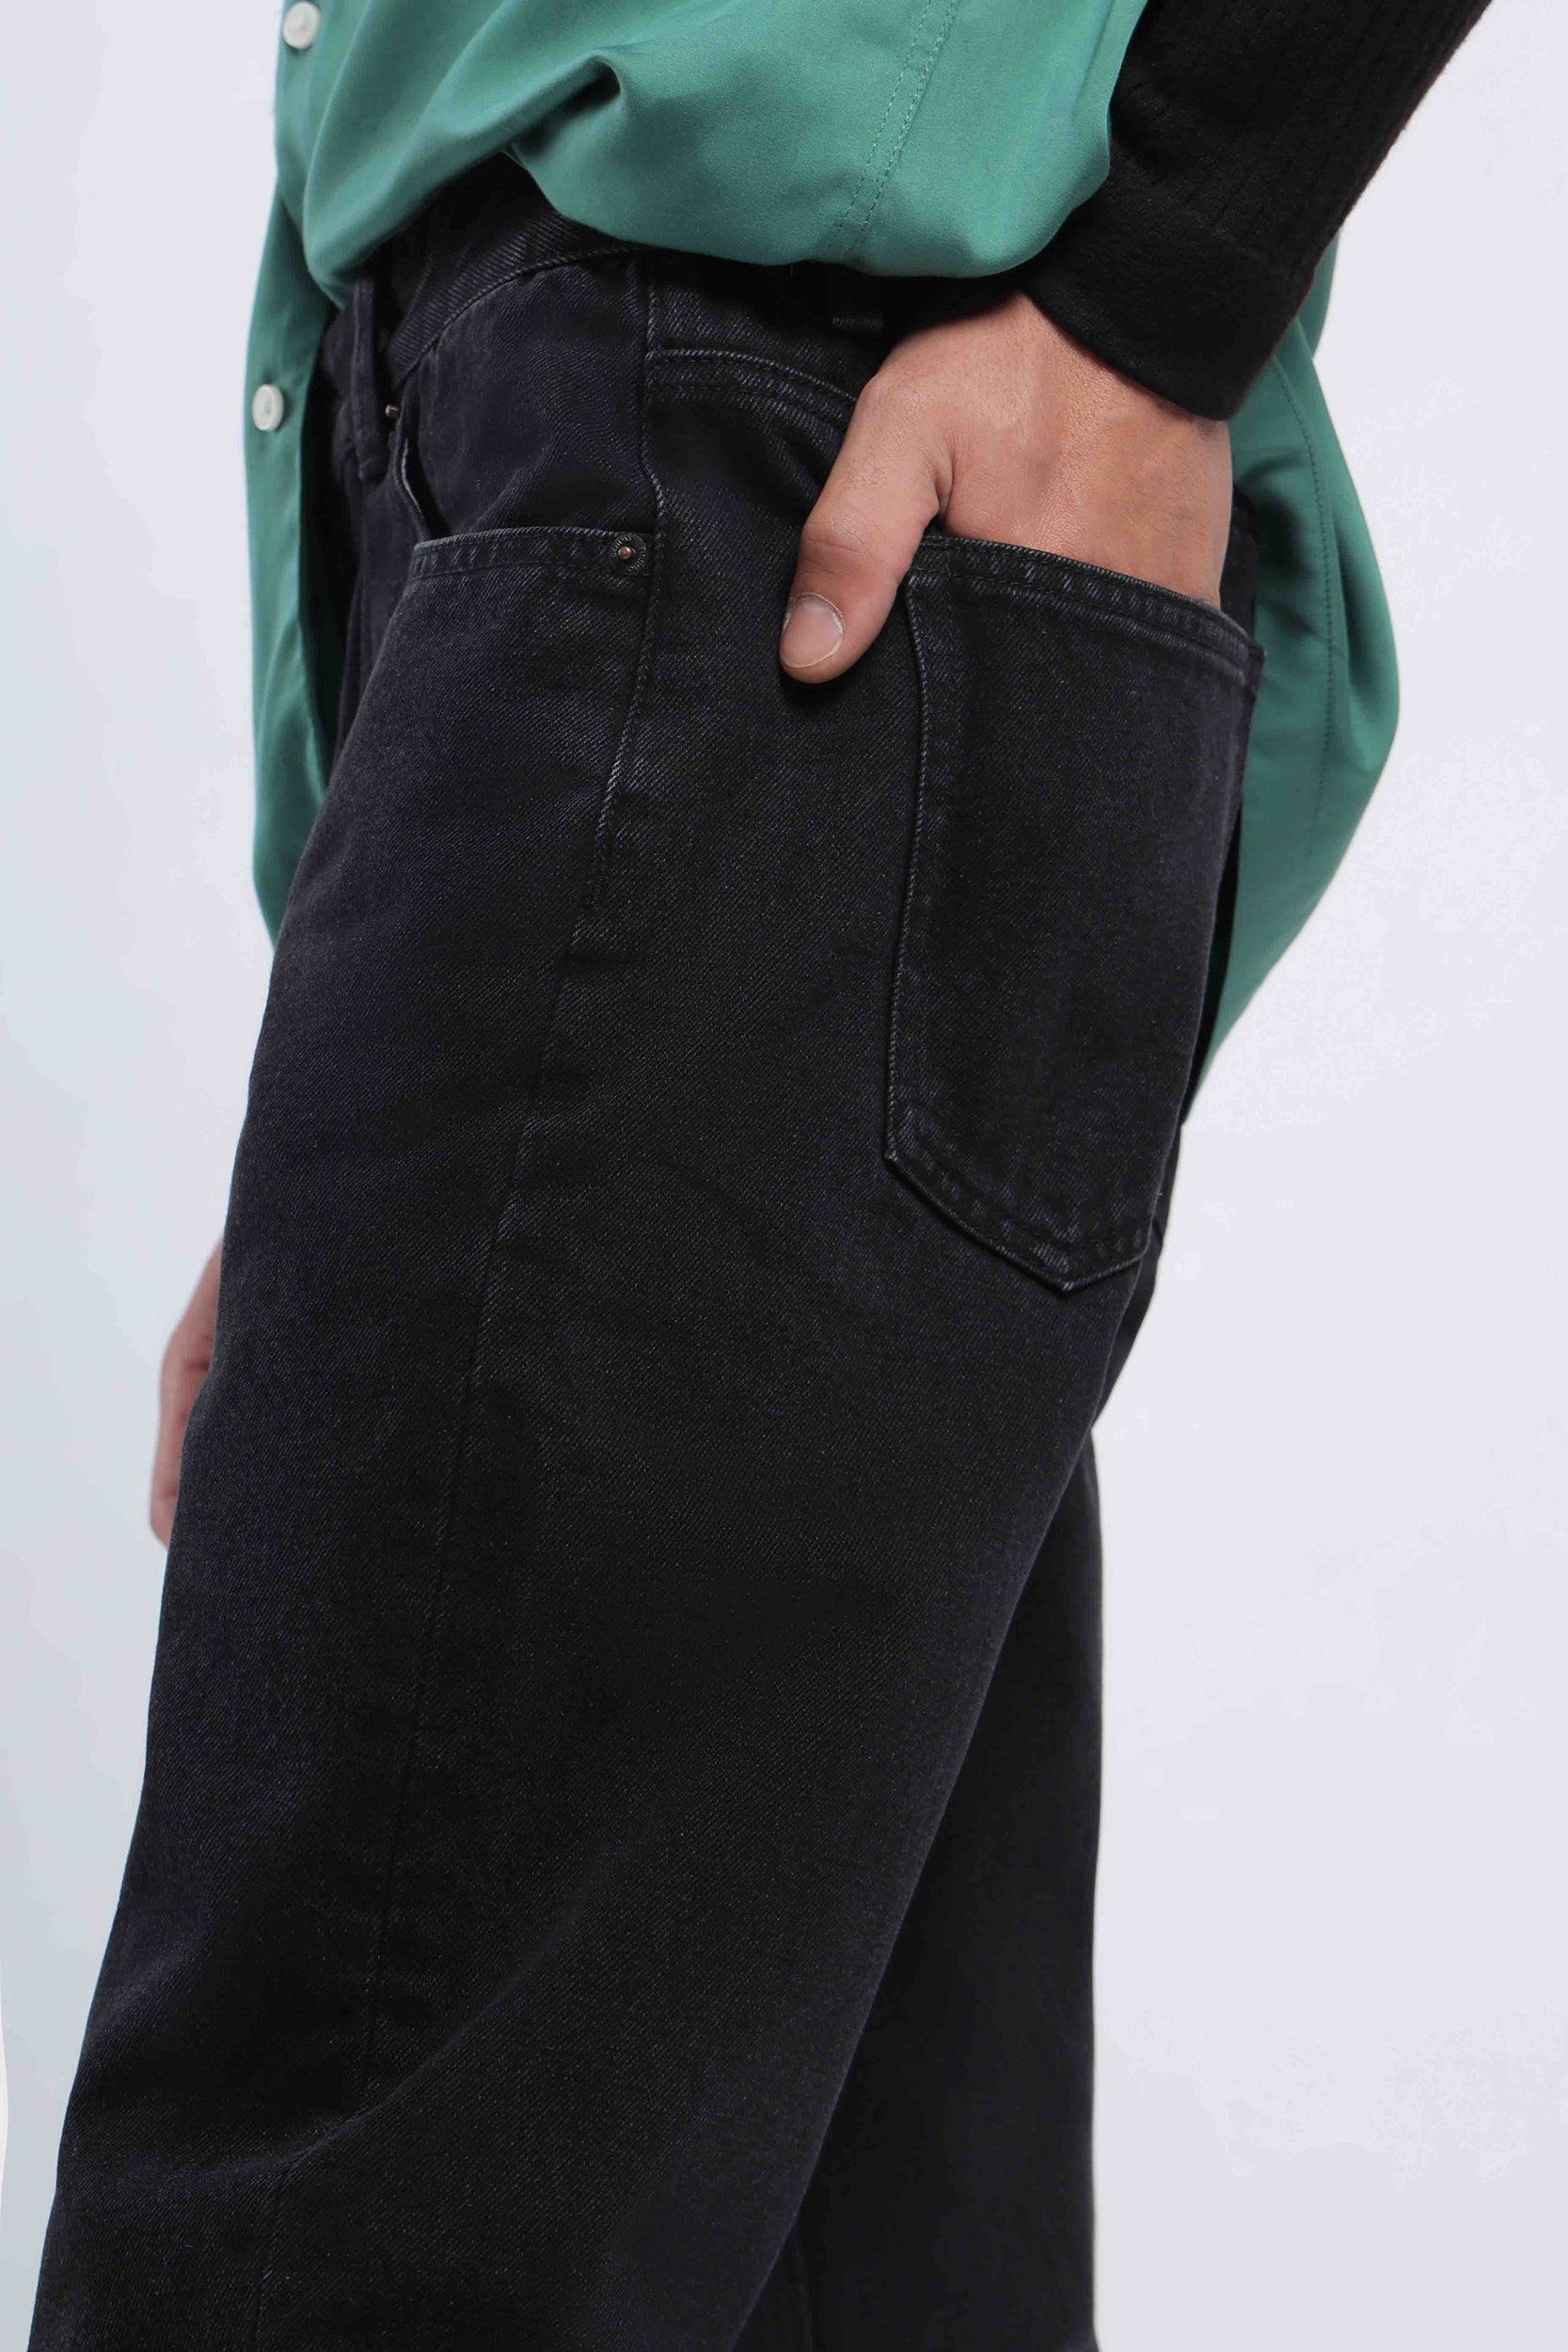 Buy Black Slim Fit Dress Pants by GentWith.com with Free Shipping